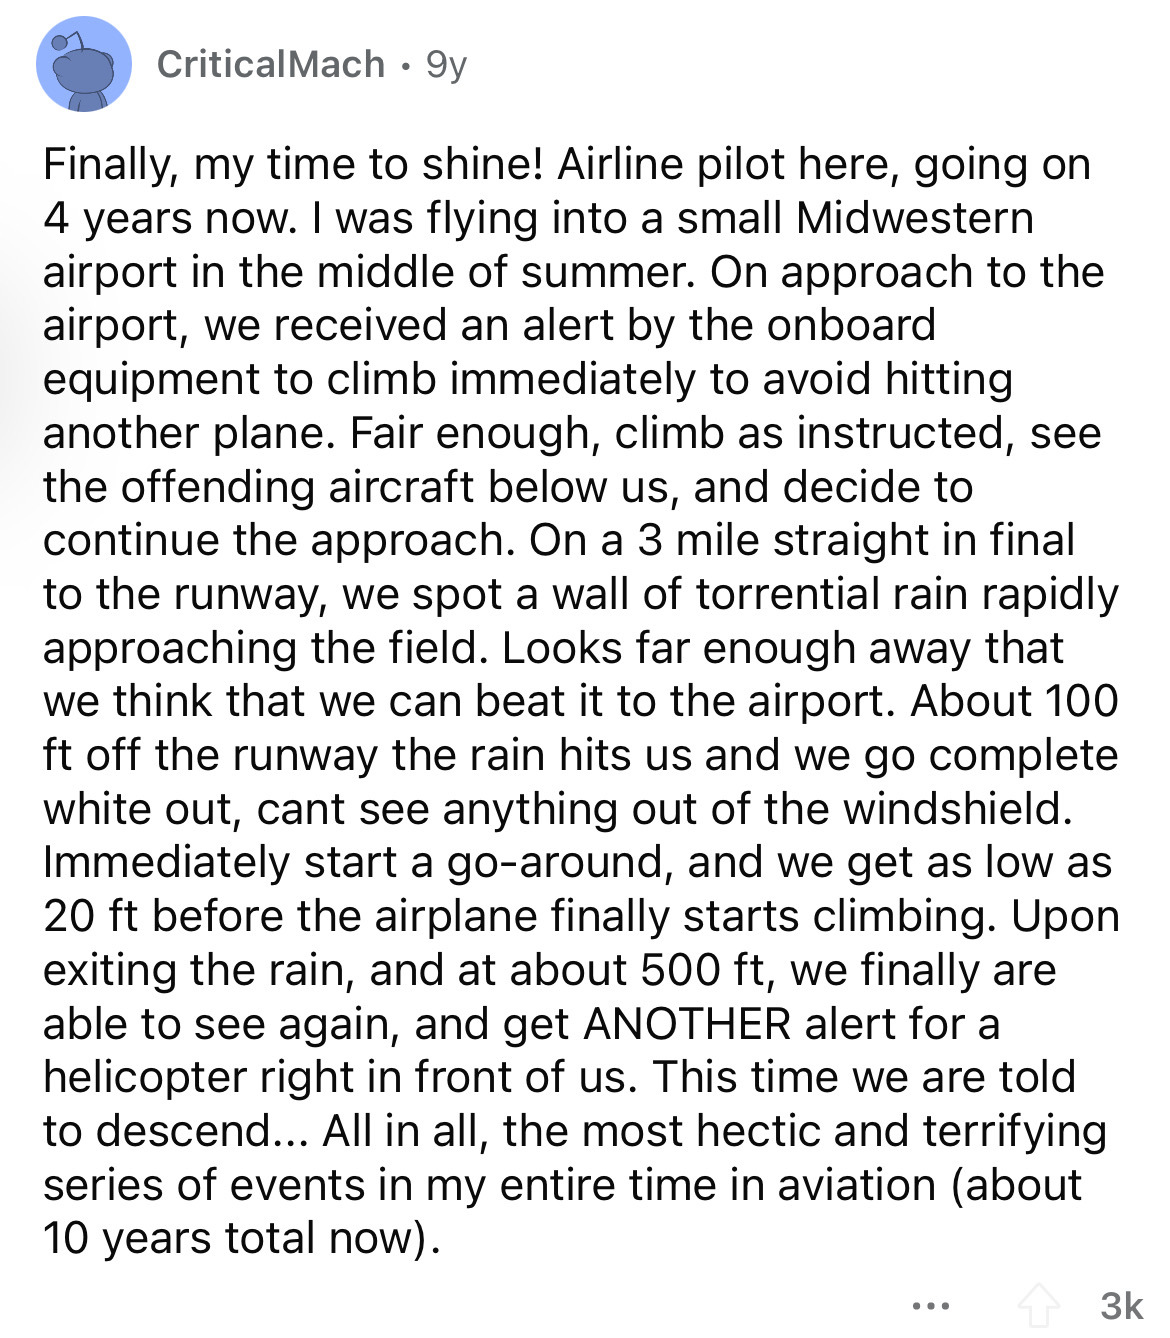 document - Critical Mach 9y Finally, my time to shine! Airline pilot here, going on 4 years now. I was flying into a small Midwestern airport in the middle of summer. On approach to the airport, we received an alert by the onboard equipment to climb immed